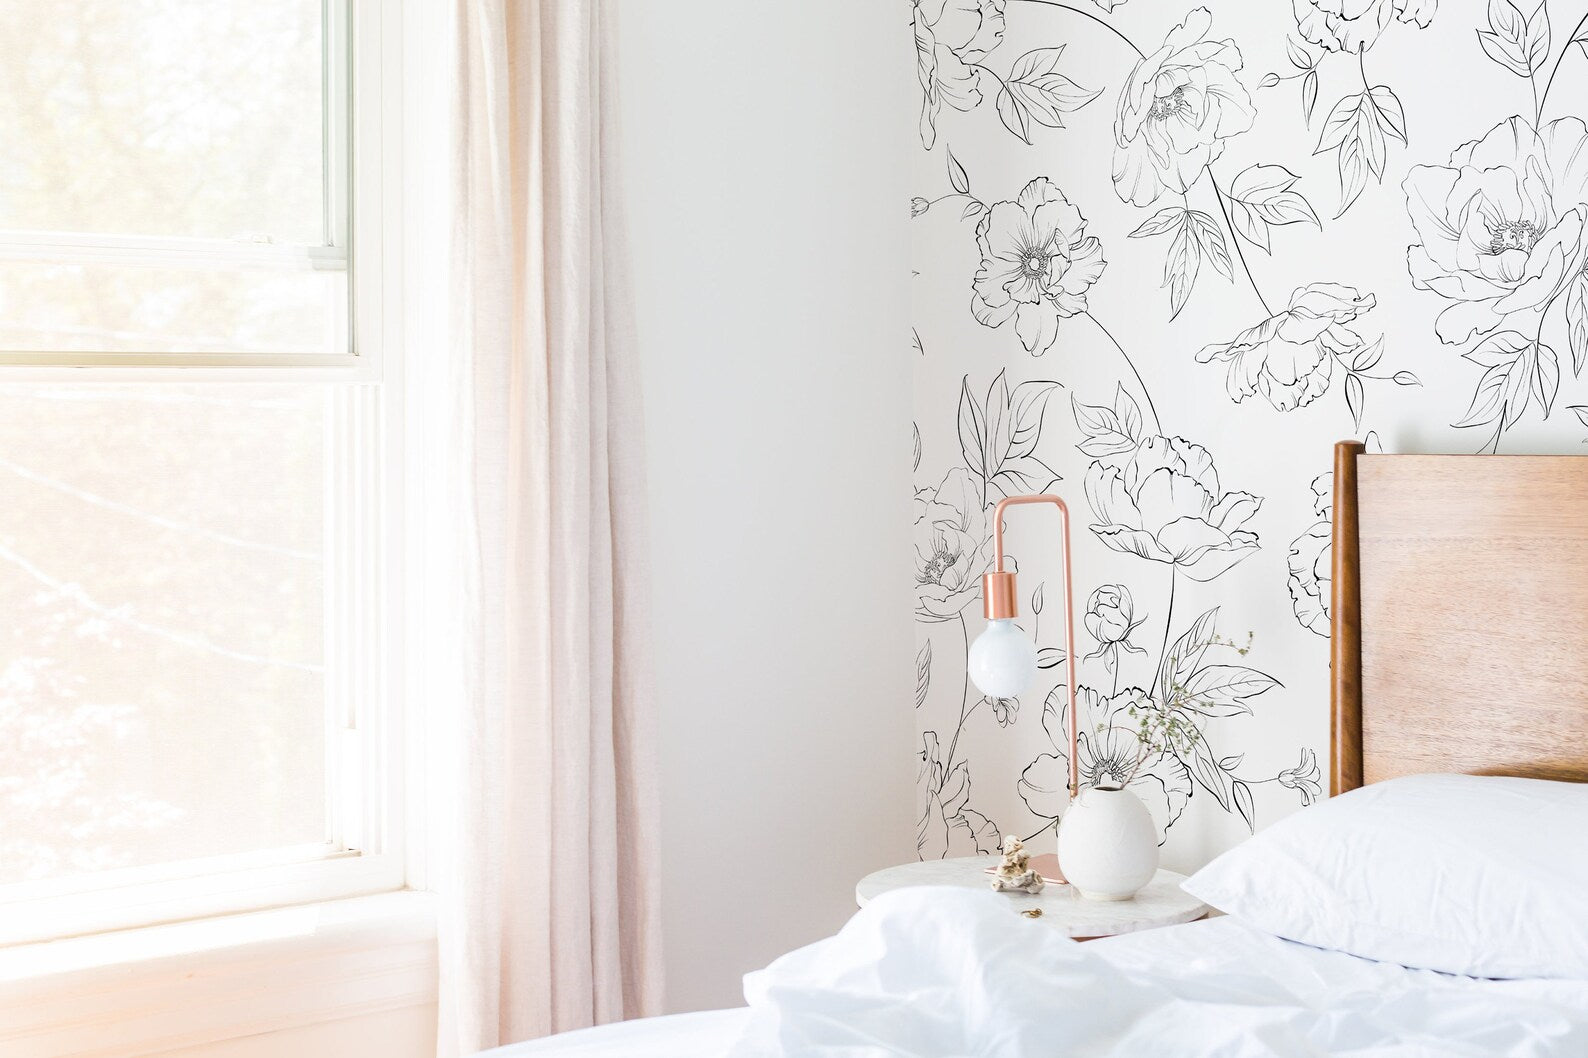 Bright bedroom with Dainty Floral Line Wallpaper - Extra Large featuring a black and white floral line art design on a light background, creating a fresh and elegant atmosphere with a wooden bed and minimalist decor.